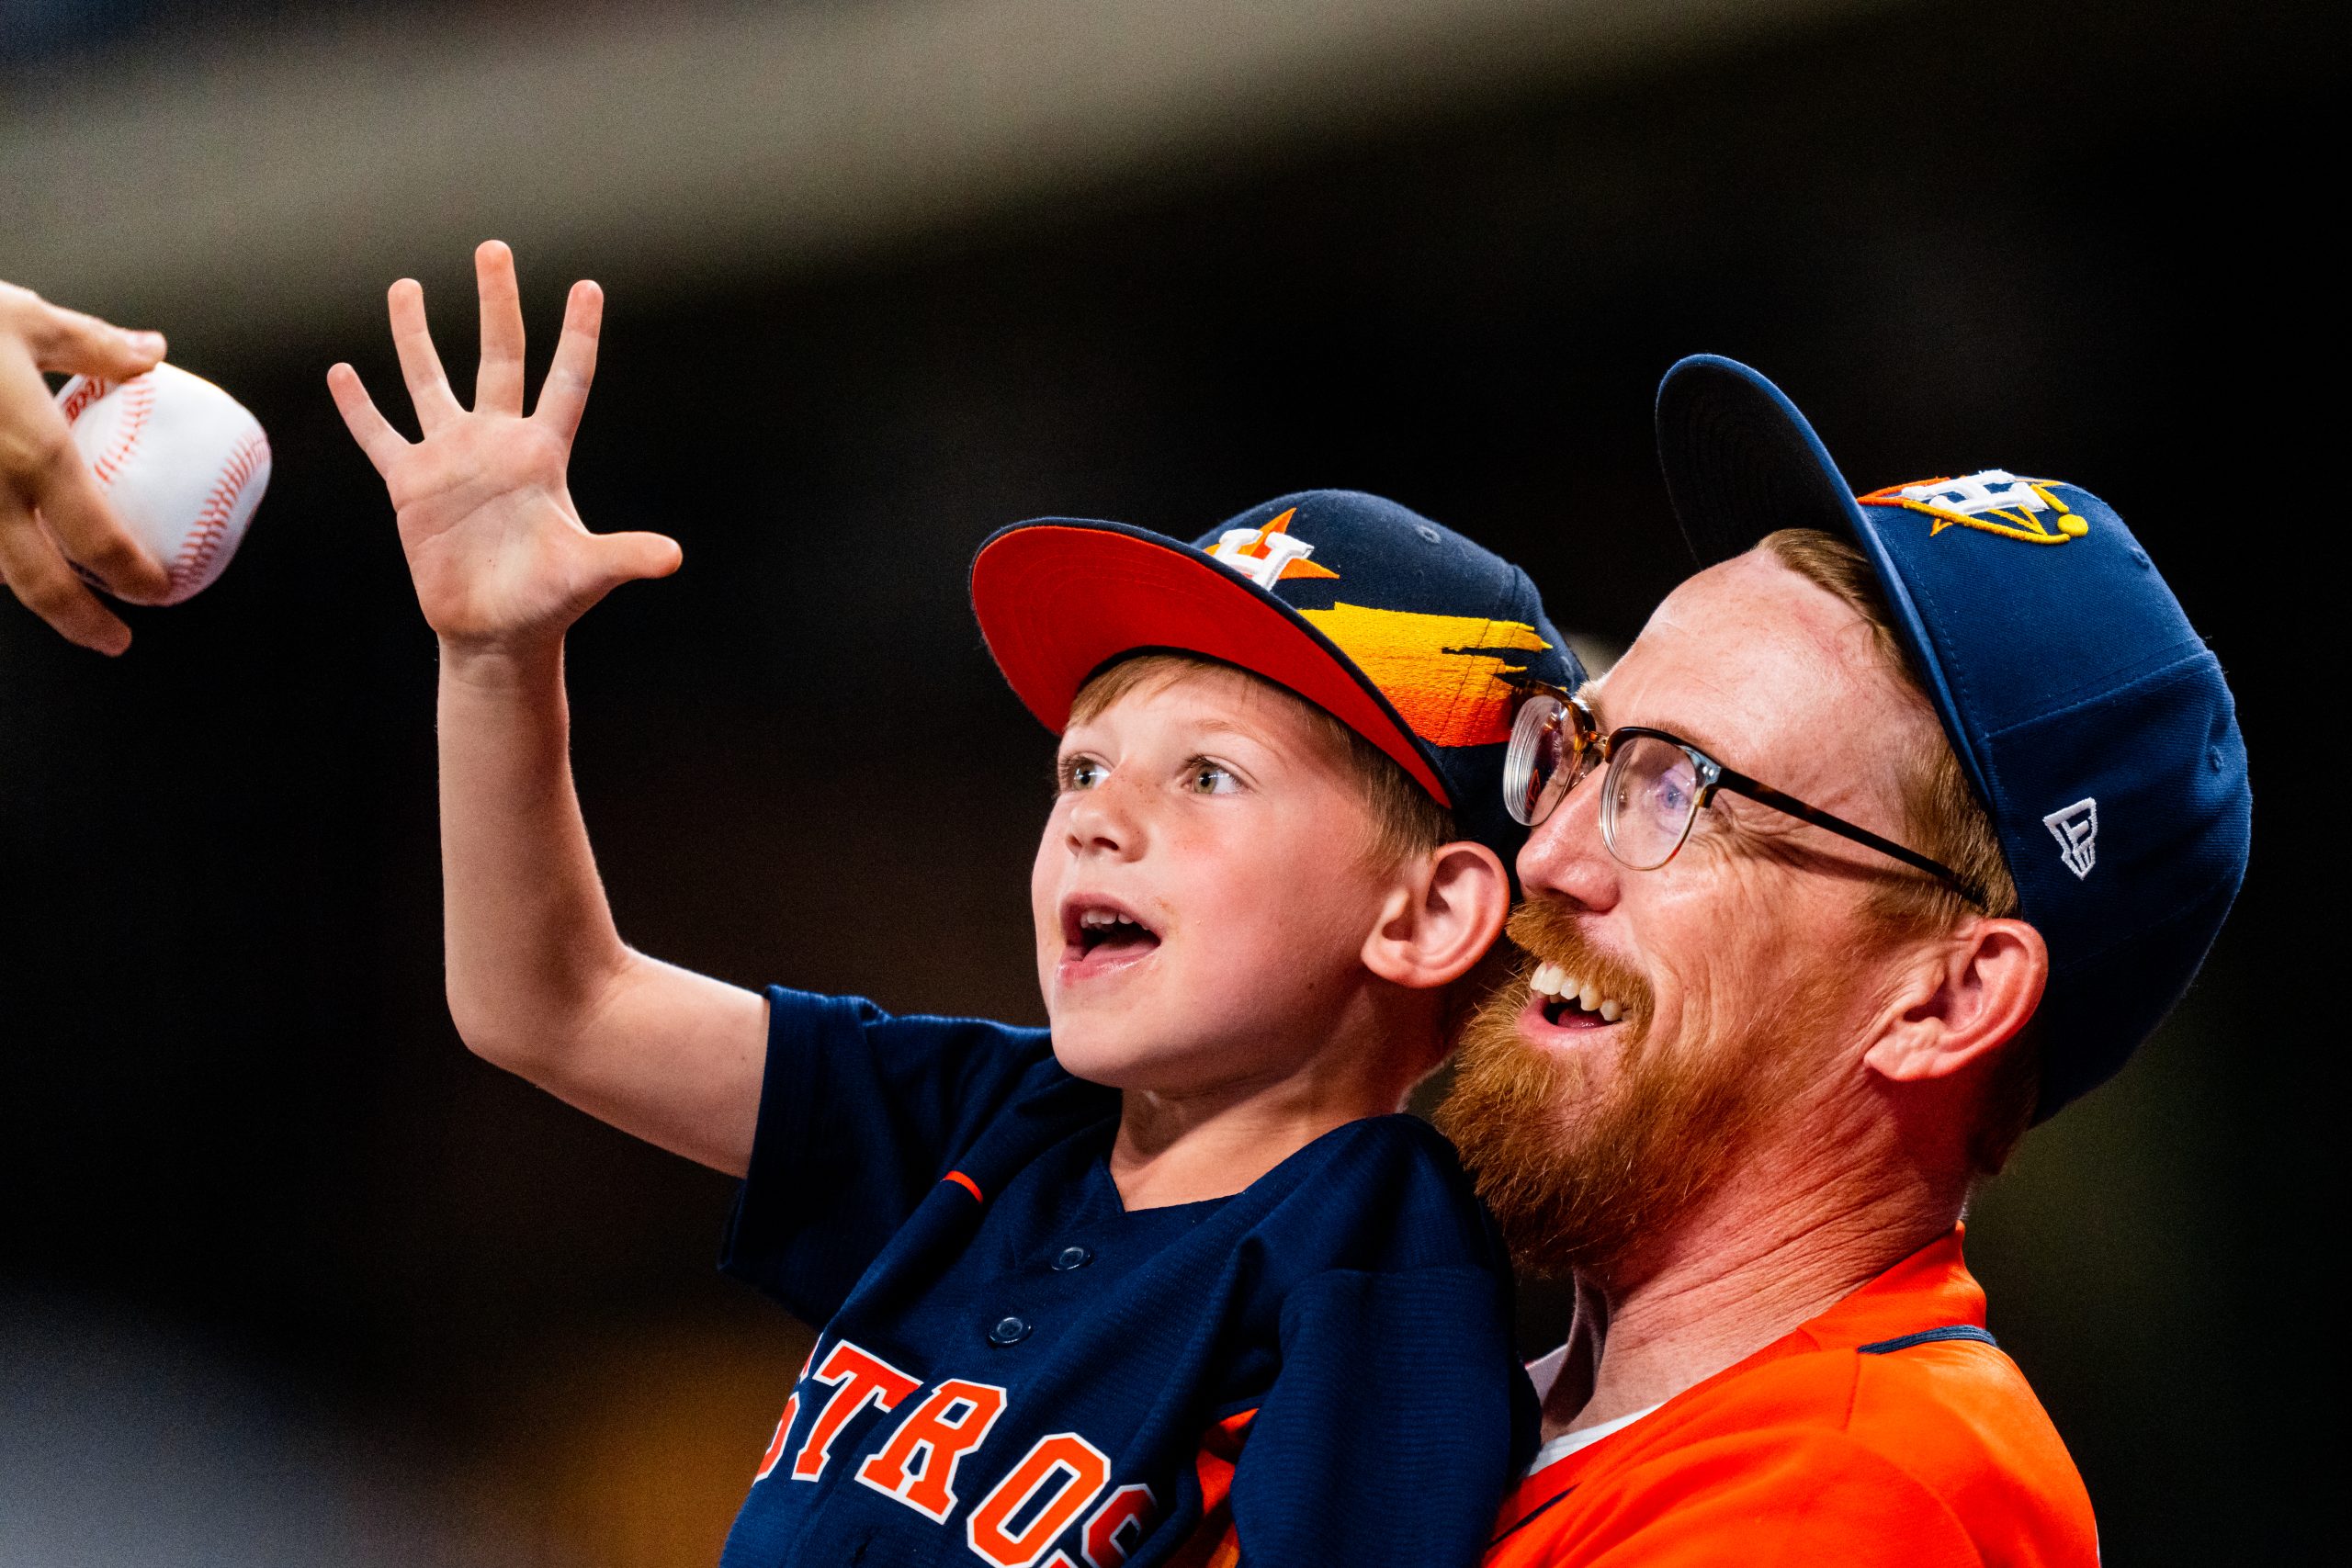 son being held by dad reaches for a baseball